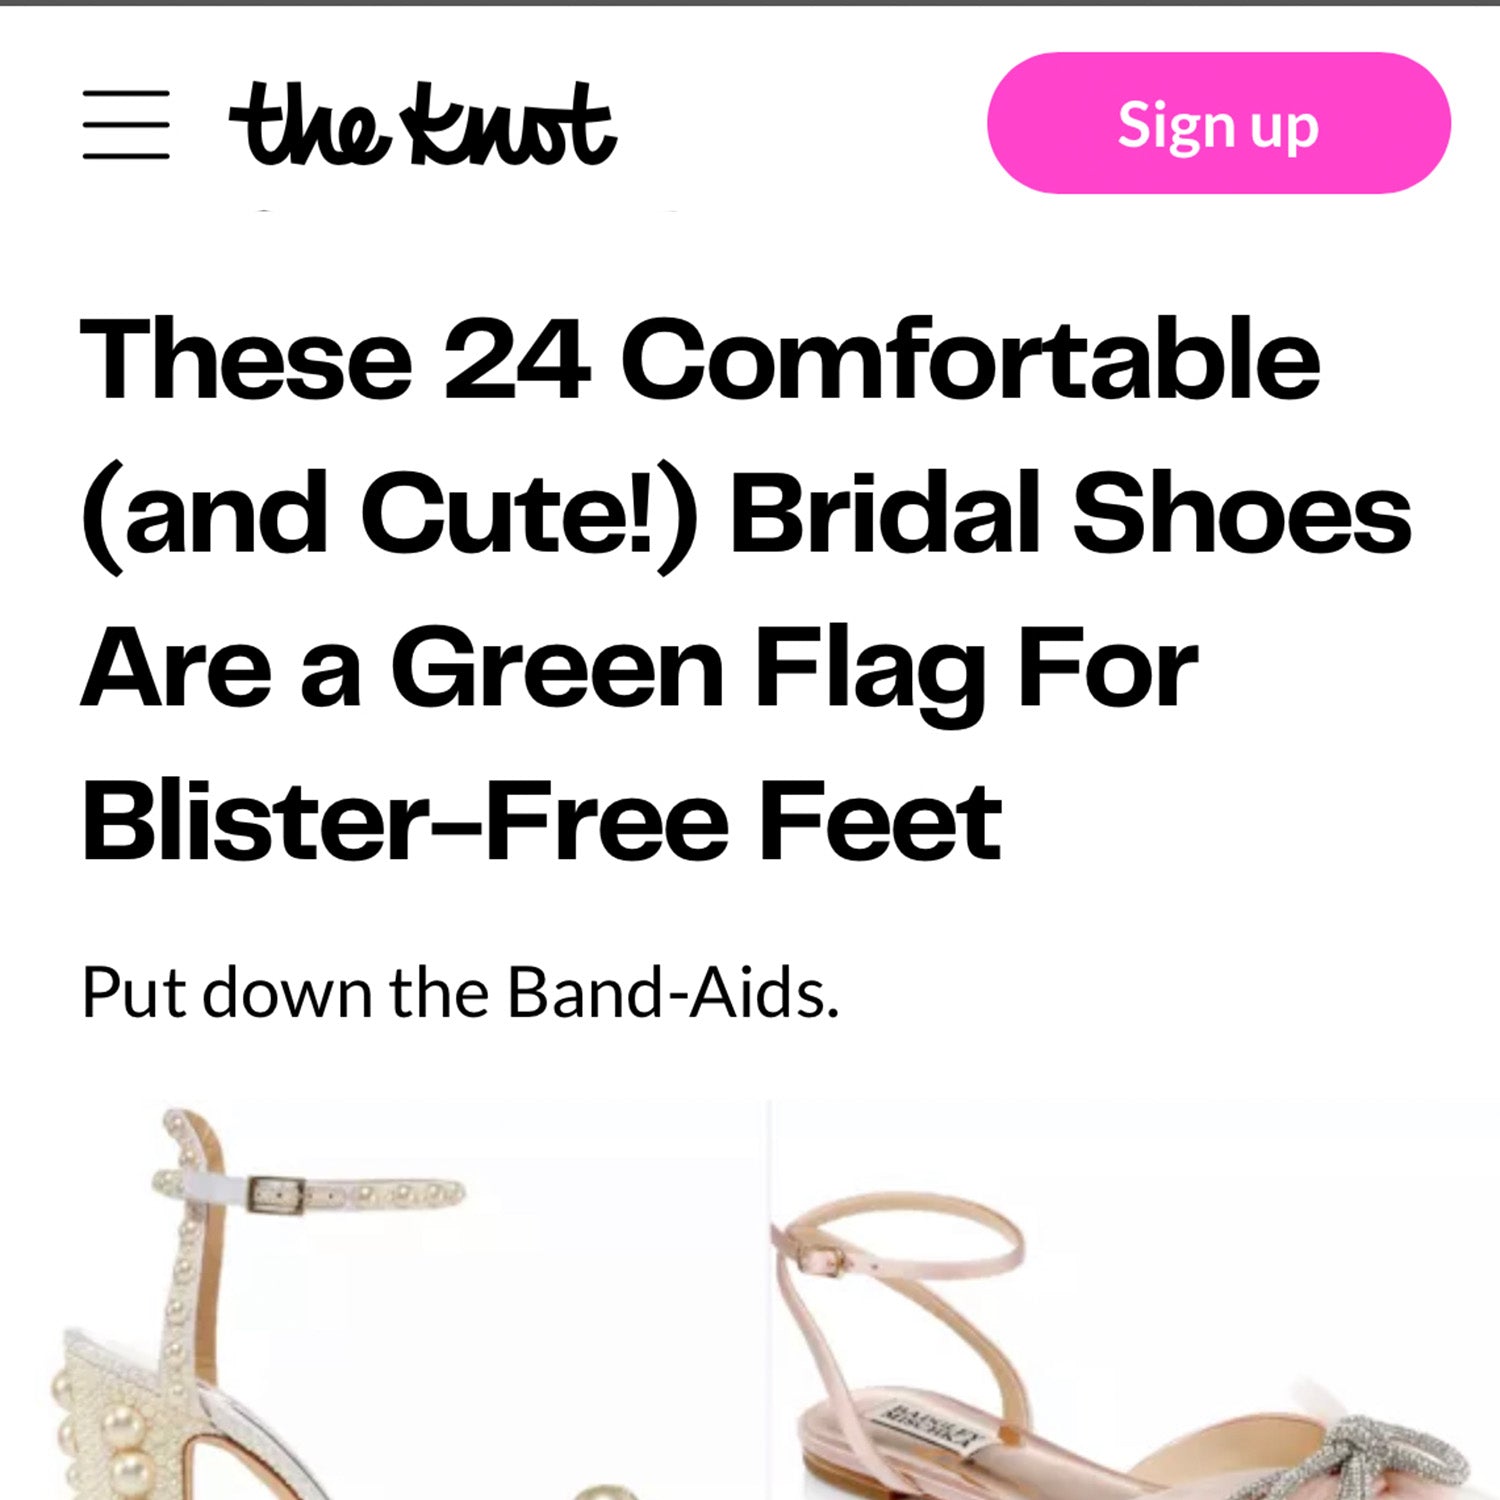 The Knot Press - 24 Comfortable Bridal Shoes